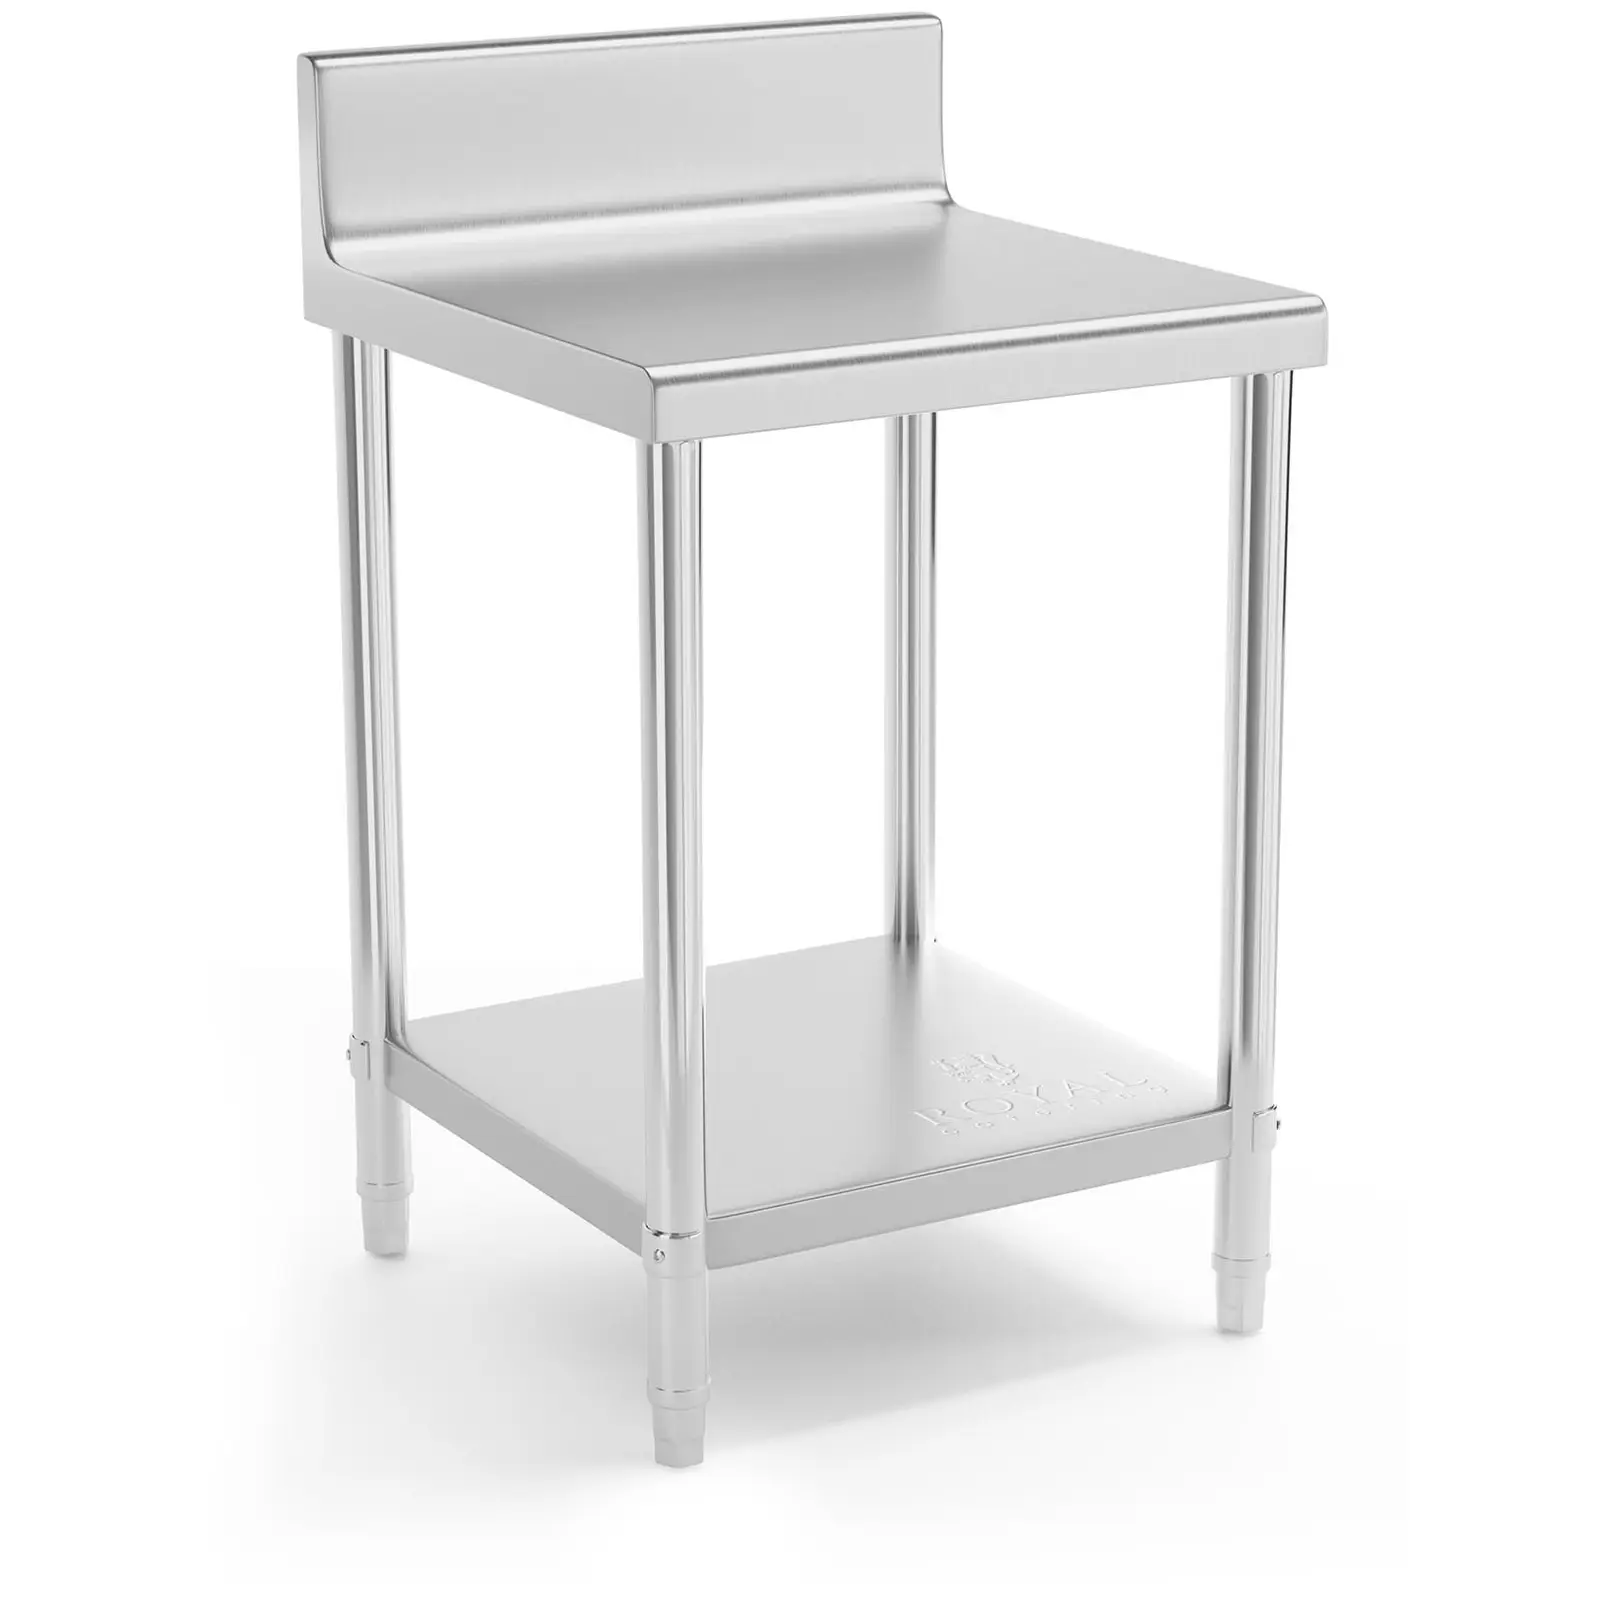 Stainless Steel Work Table - 60 x 60 cm - upstand - 150 kg load capacity